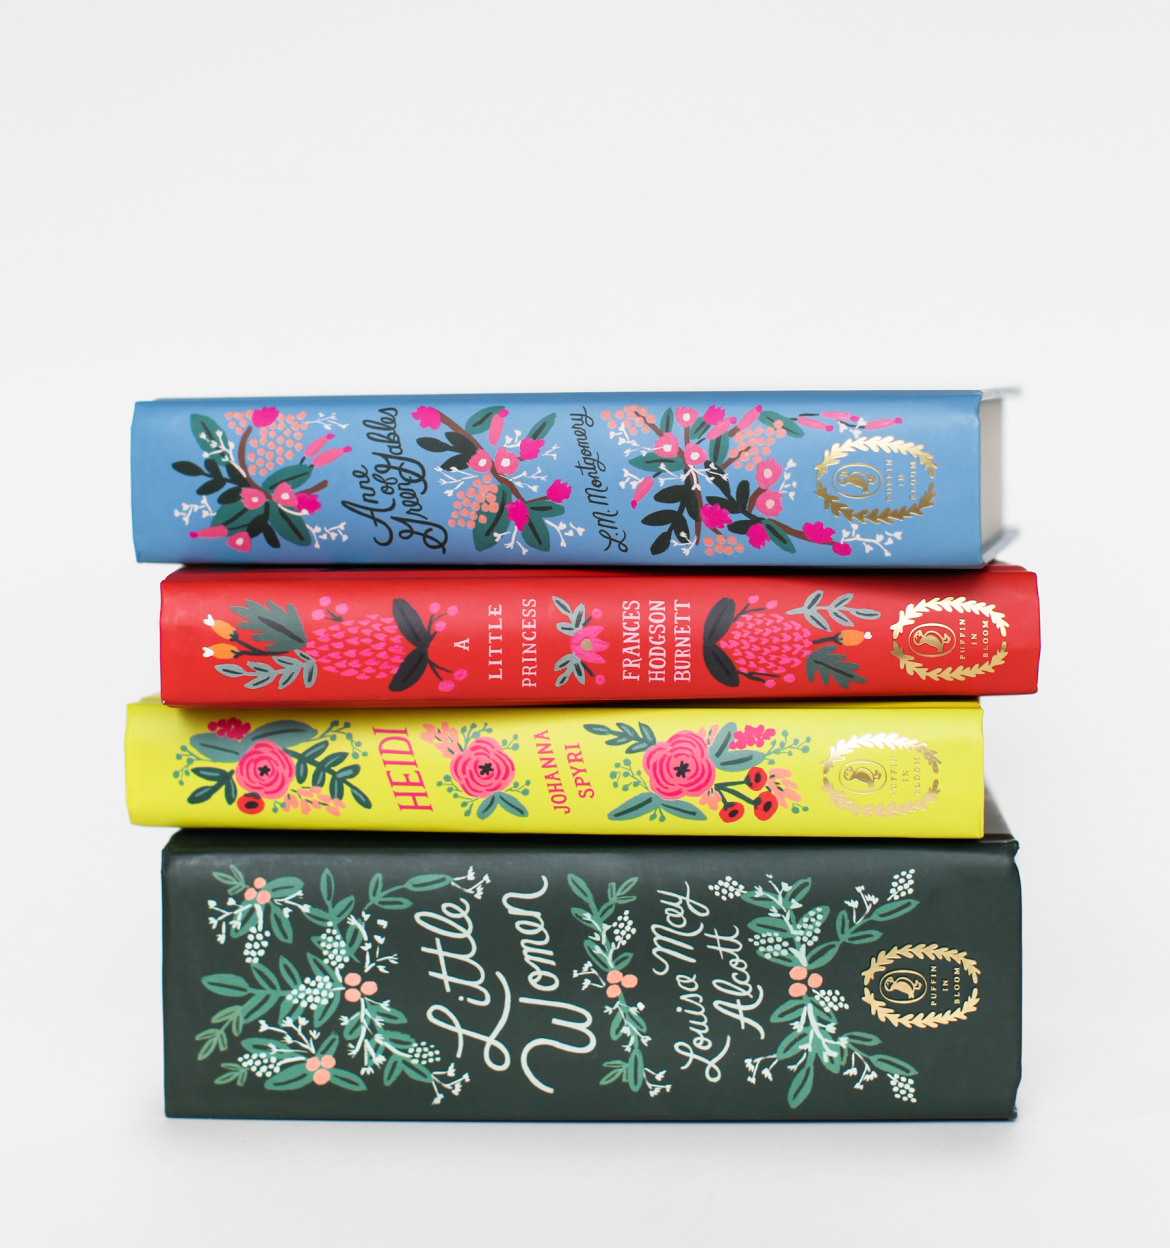 In Bloom Collection of Books by Rifle Paper Company